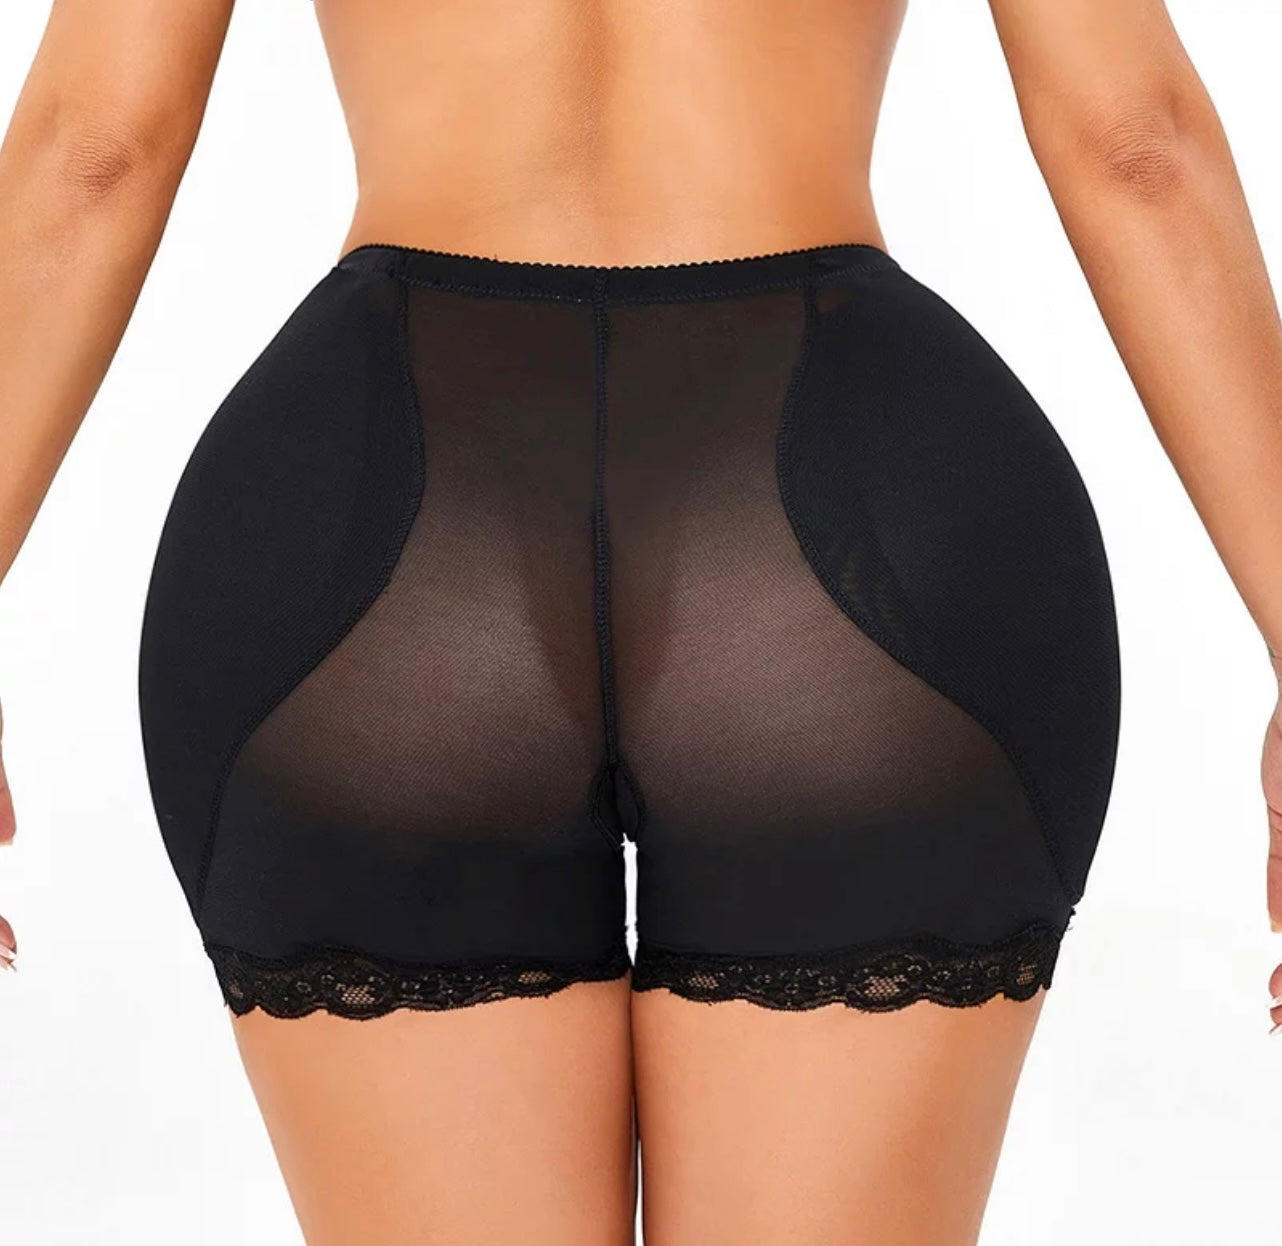 Curve short - 1 (low waist) hip/ butt pad with lace – Official BBL